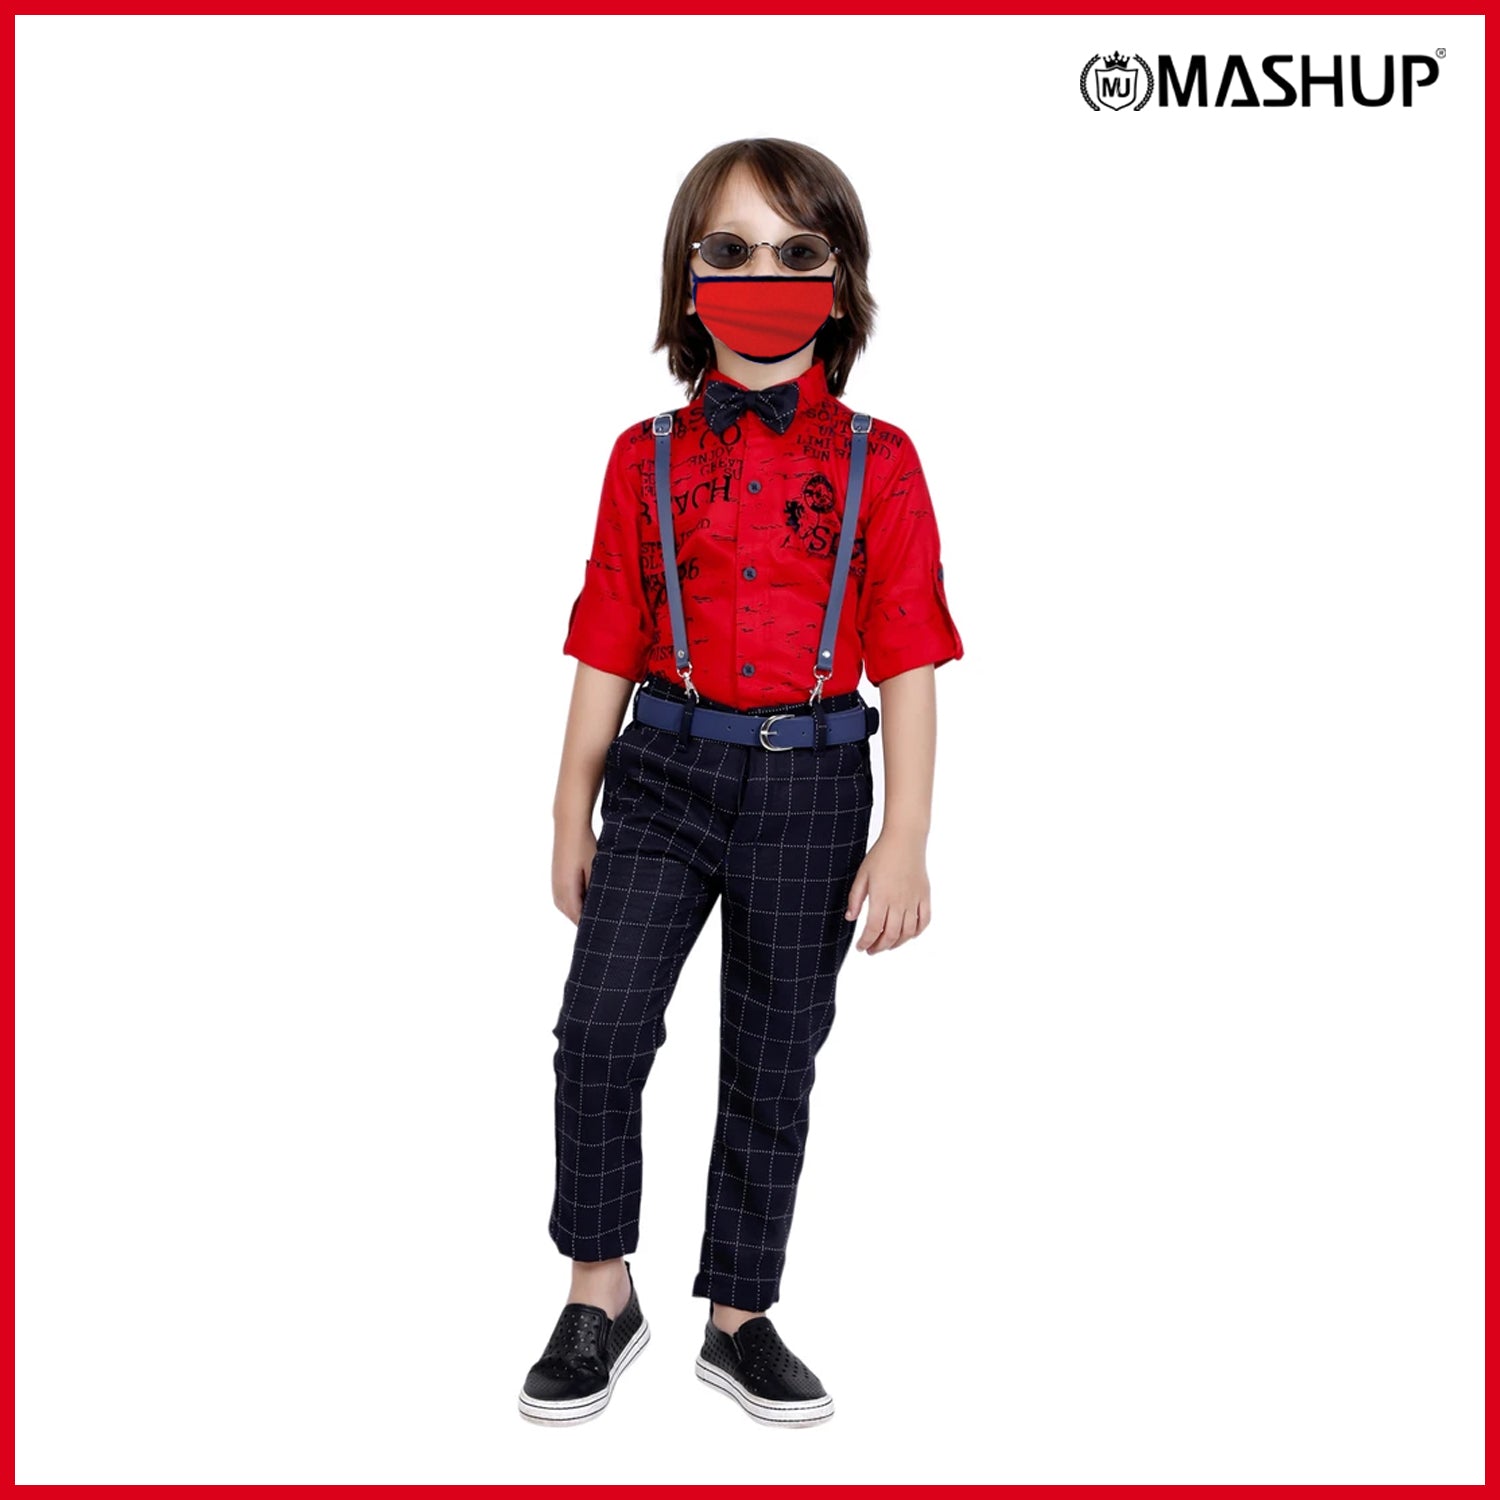 Bad Boys printed party Outfit with Suspenders and a Bow. - mashup boys